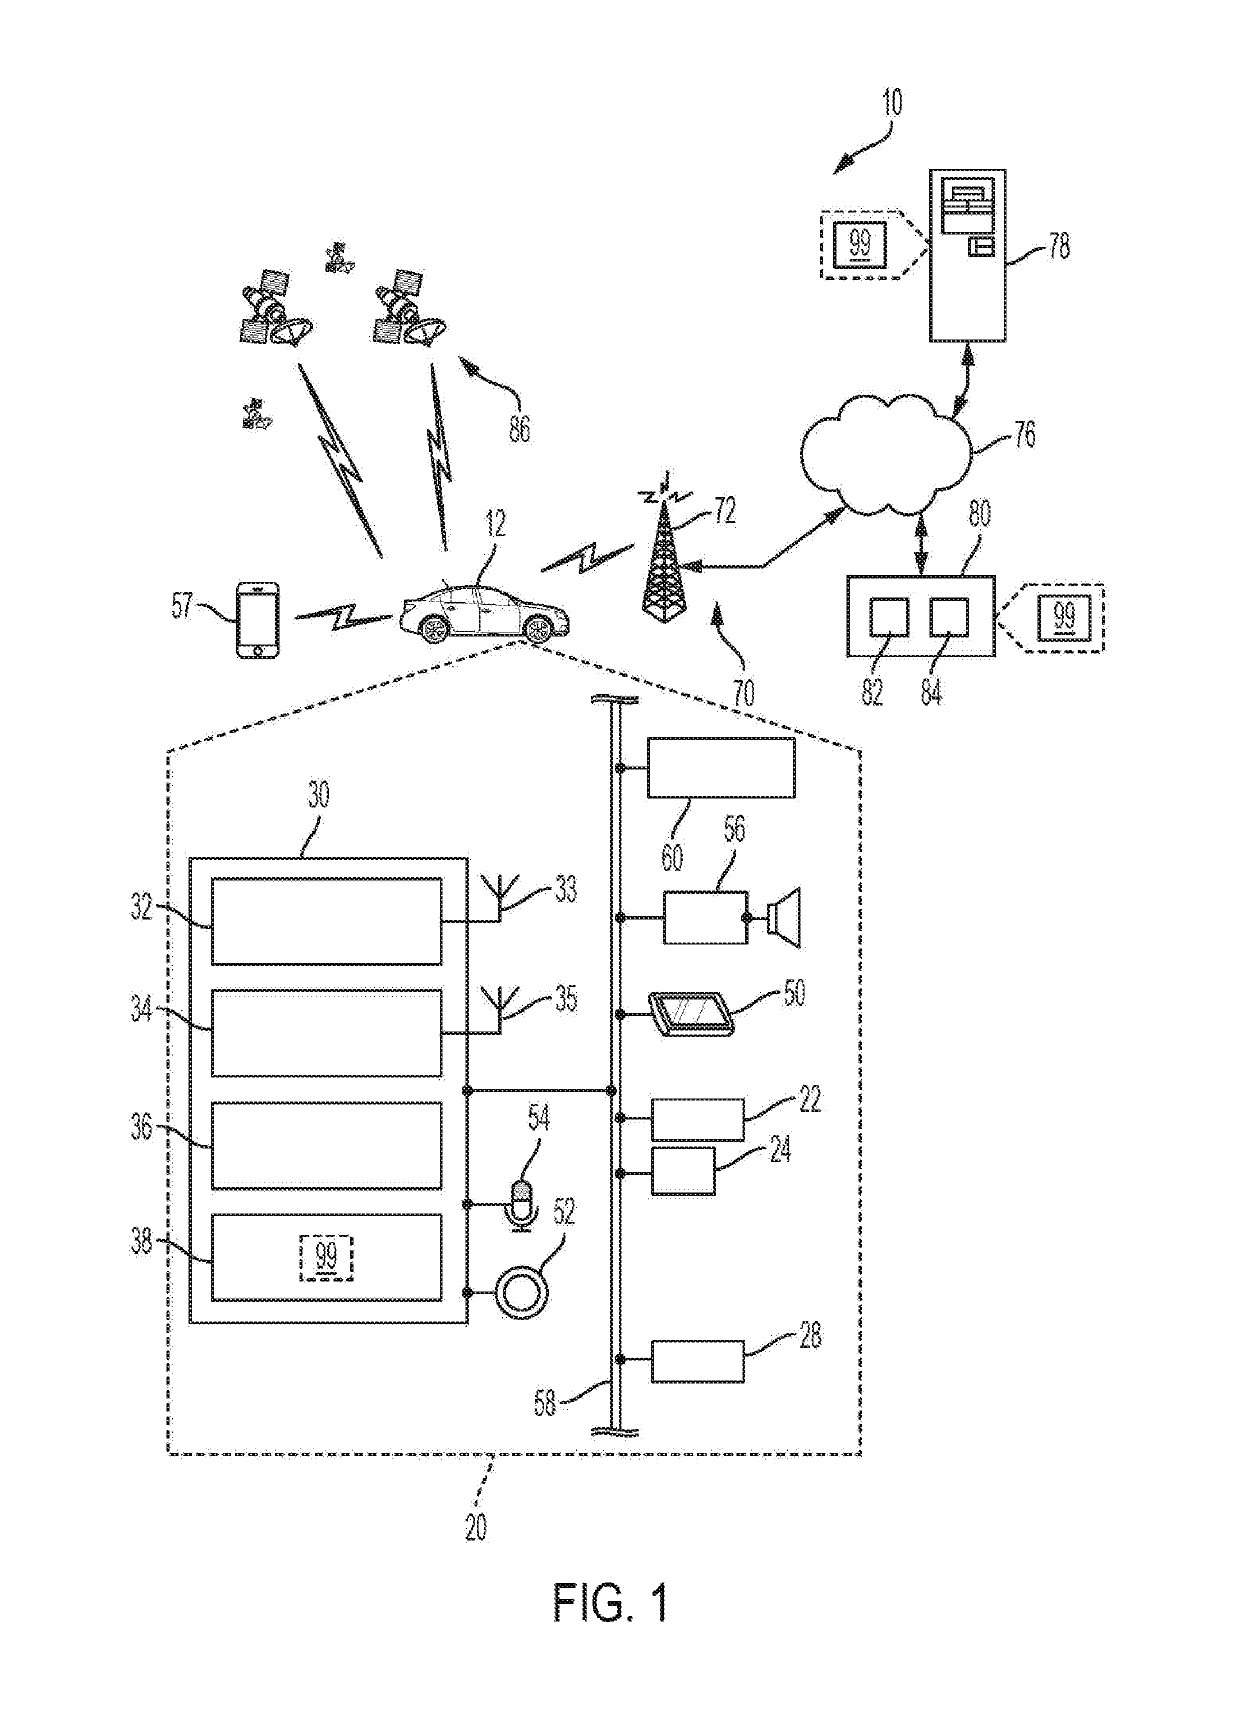 Method and system to mask occupant sounds in a ride sharing environment